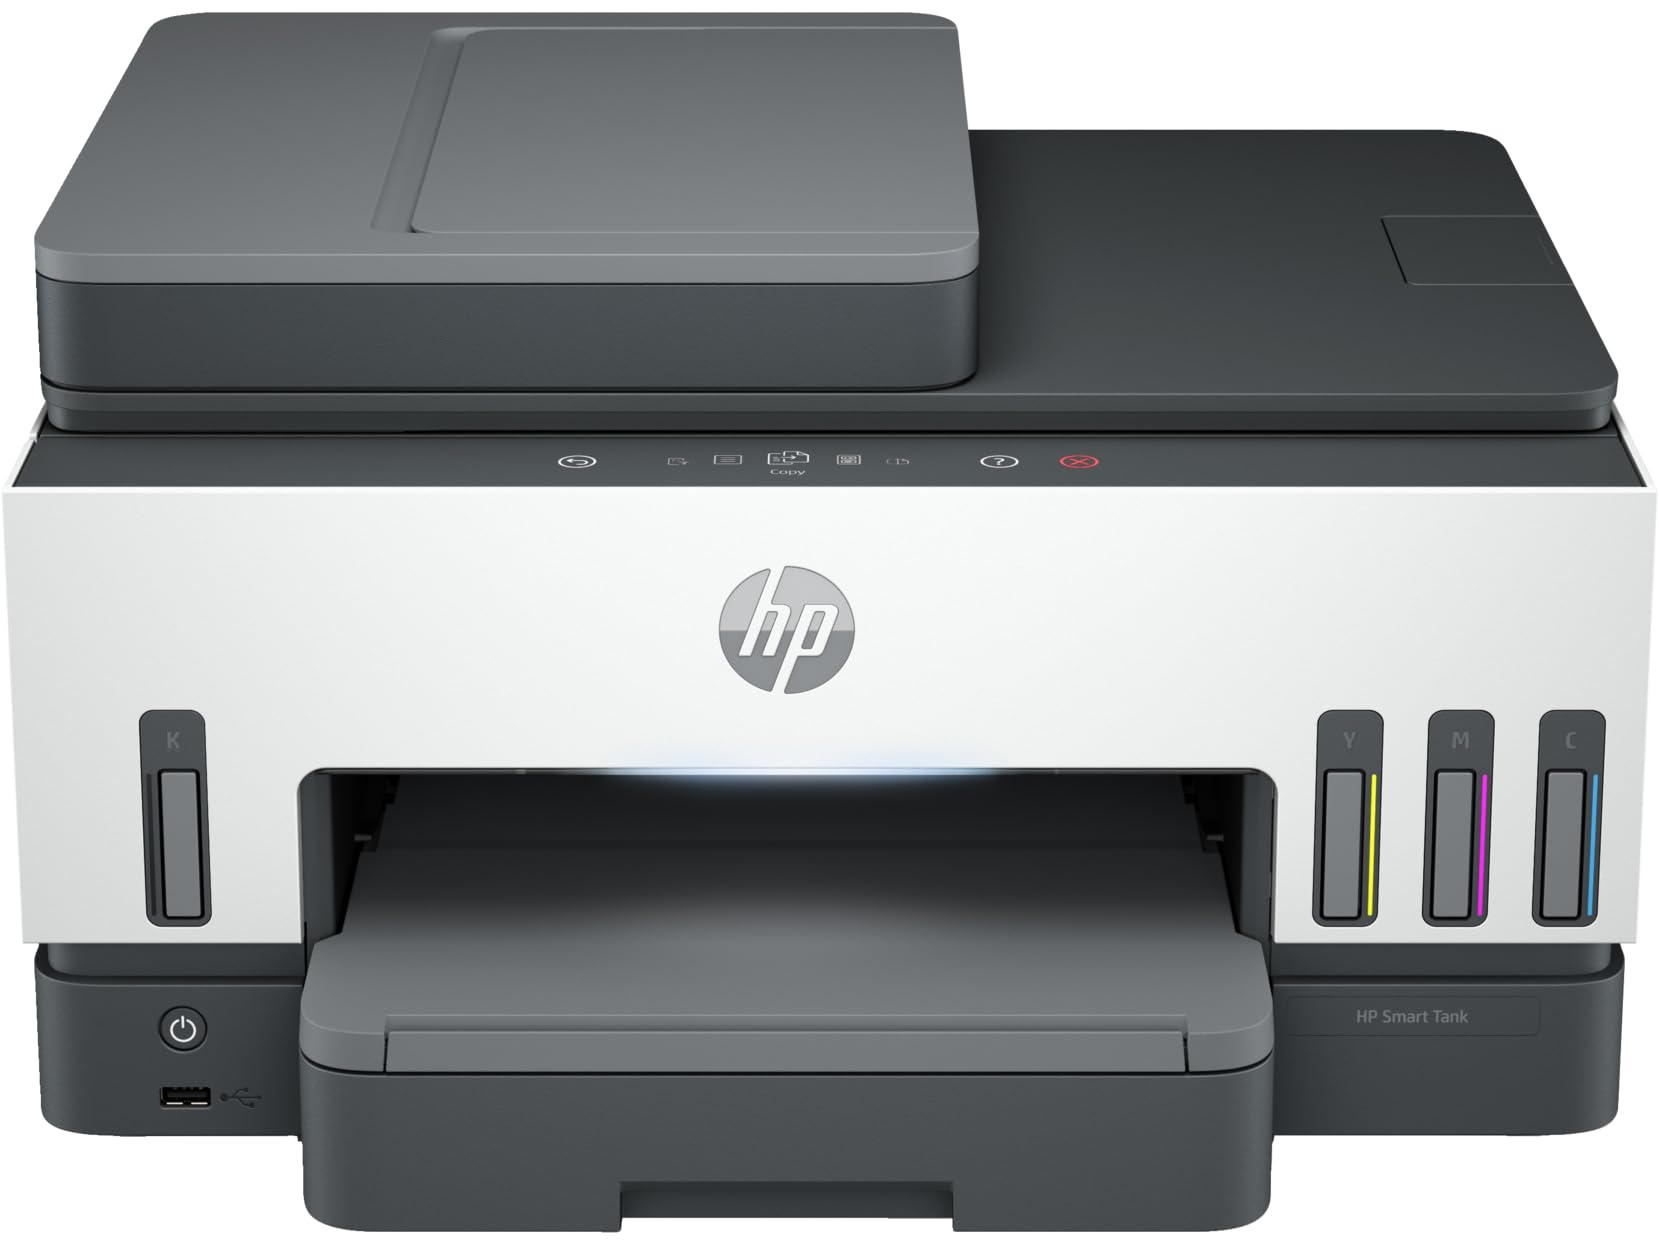 HP Smart Tank 725 All-in-One Printer wireless, Print, Scan, Copy, Auto Duplex Printing, Print up to 18000 black or 8000 color pages, White/Blue [28B51A], Standard - CaveHubs